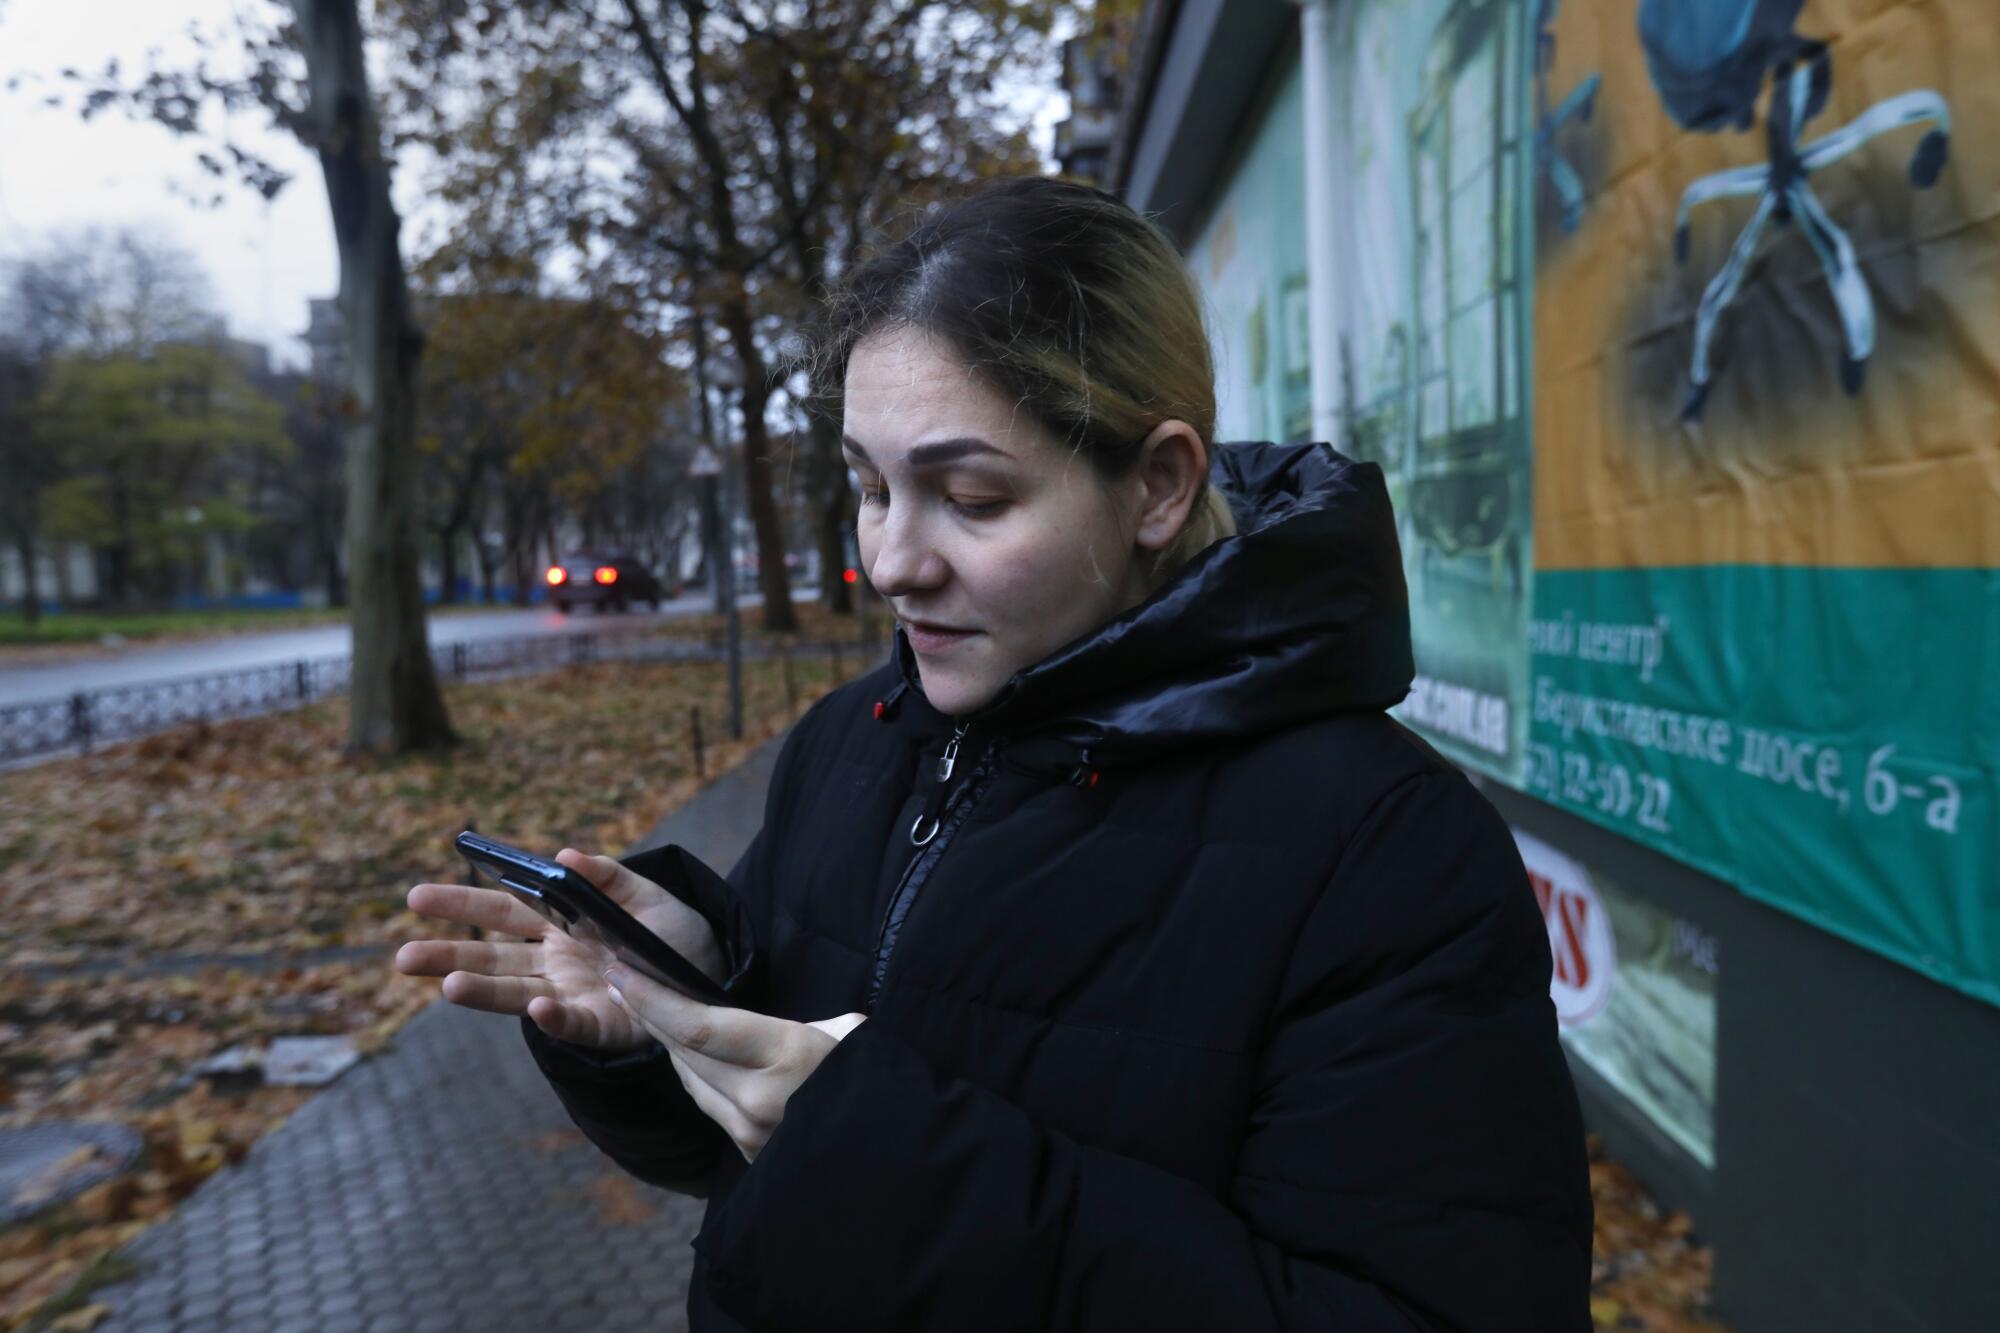 A woman with dark hair, wearing in a hooded black jacket, looks at her cellphone along a tree-lined street 